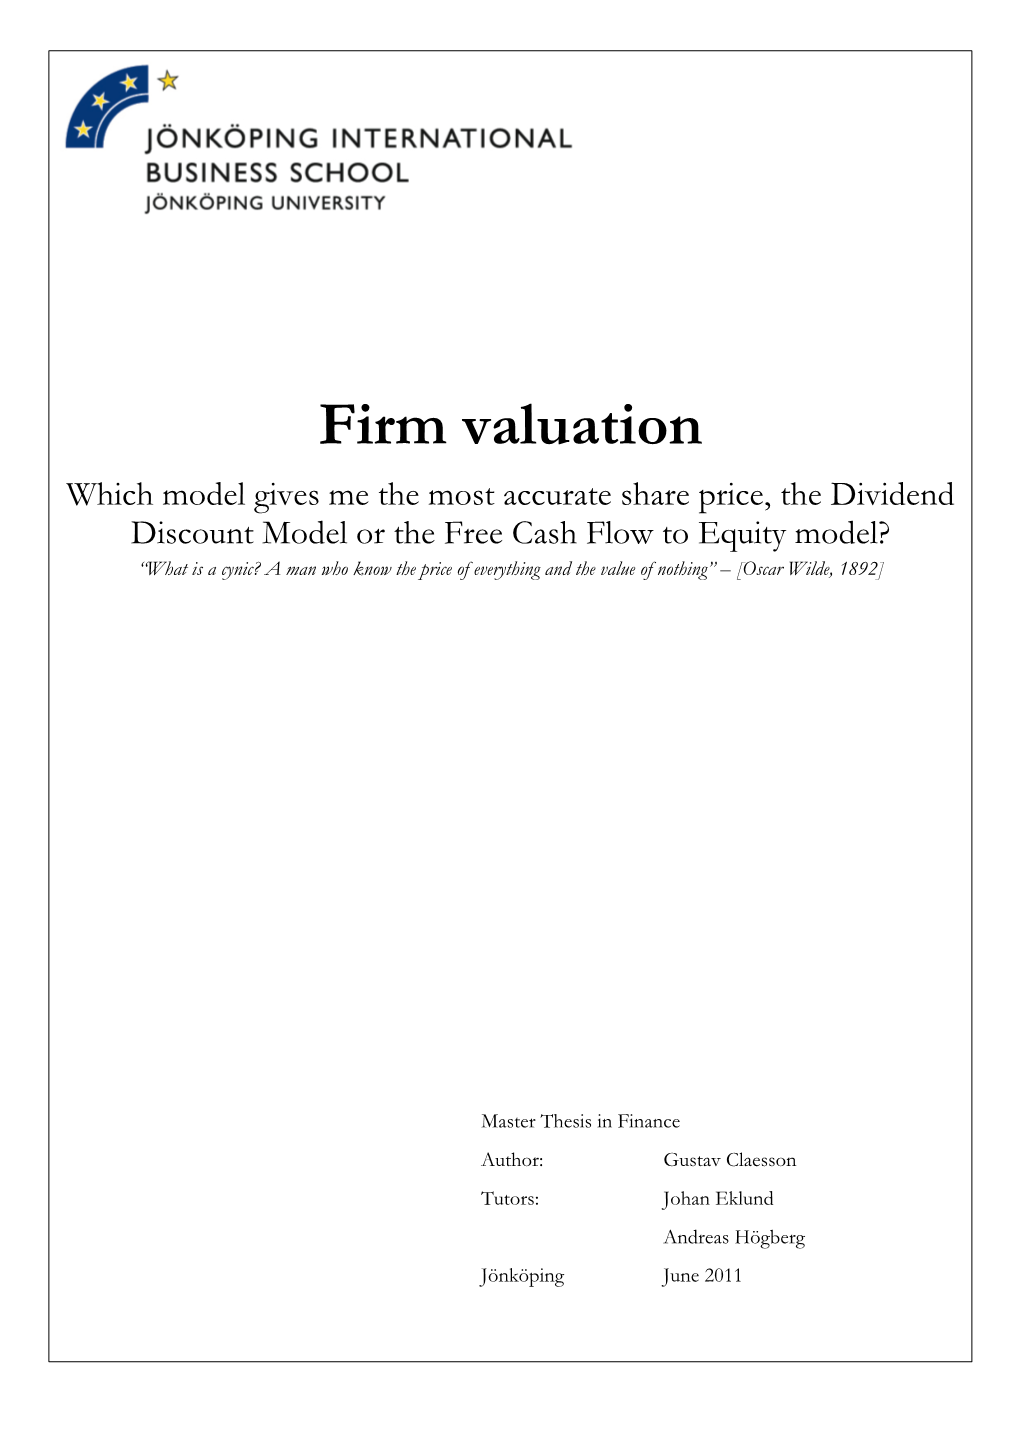 Firm Valuation